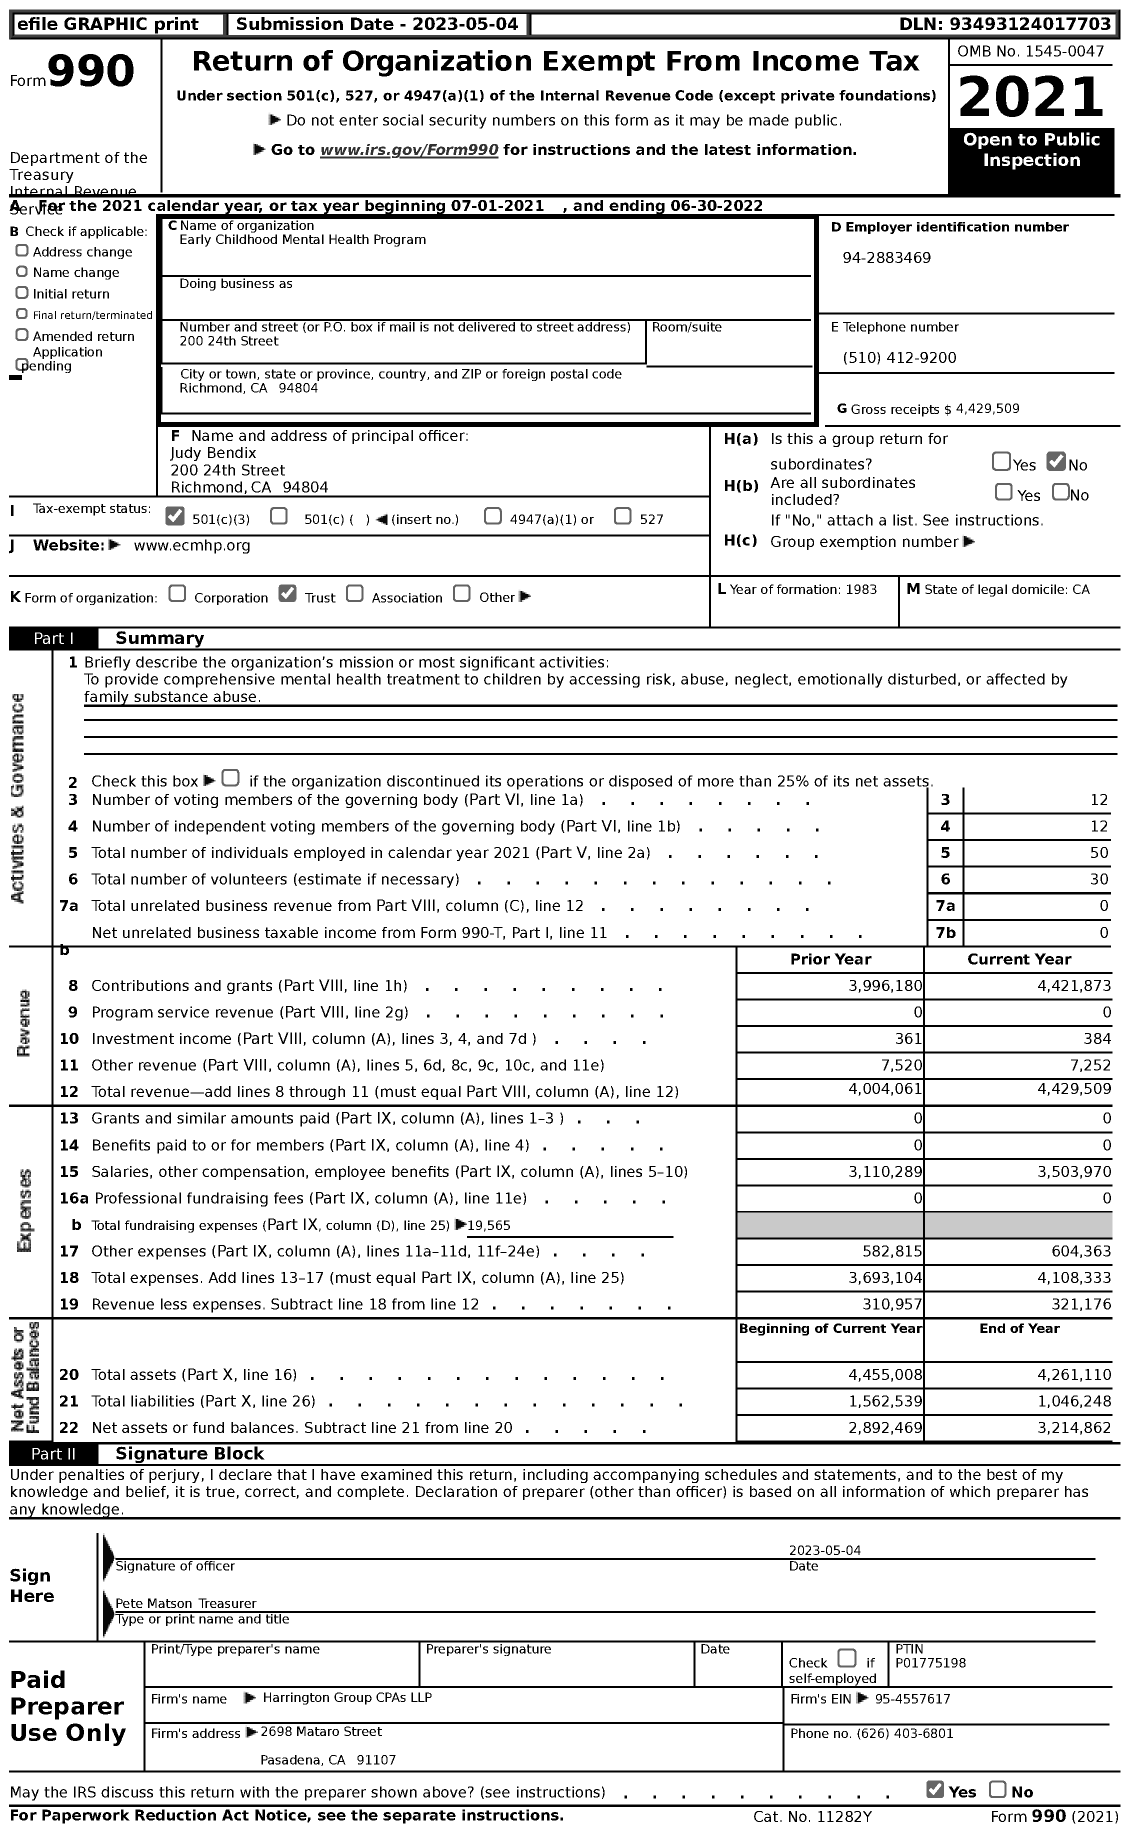 Image of first page of 2021 Form 990 for Early Childhood Mental Health Program (ECMHP)